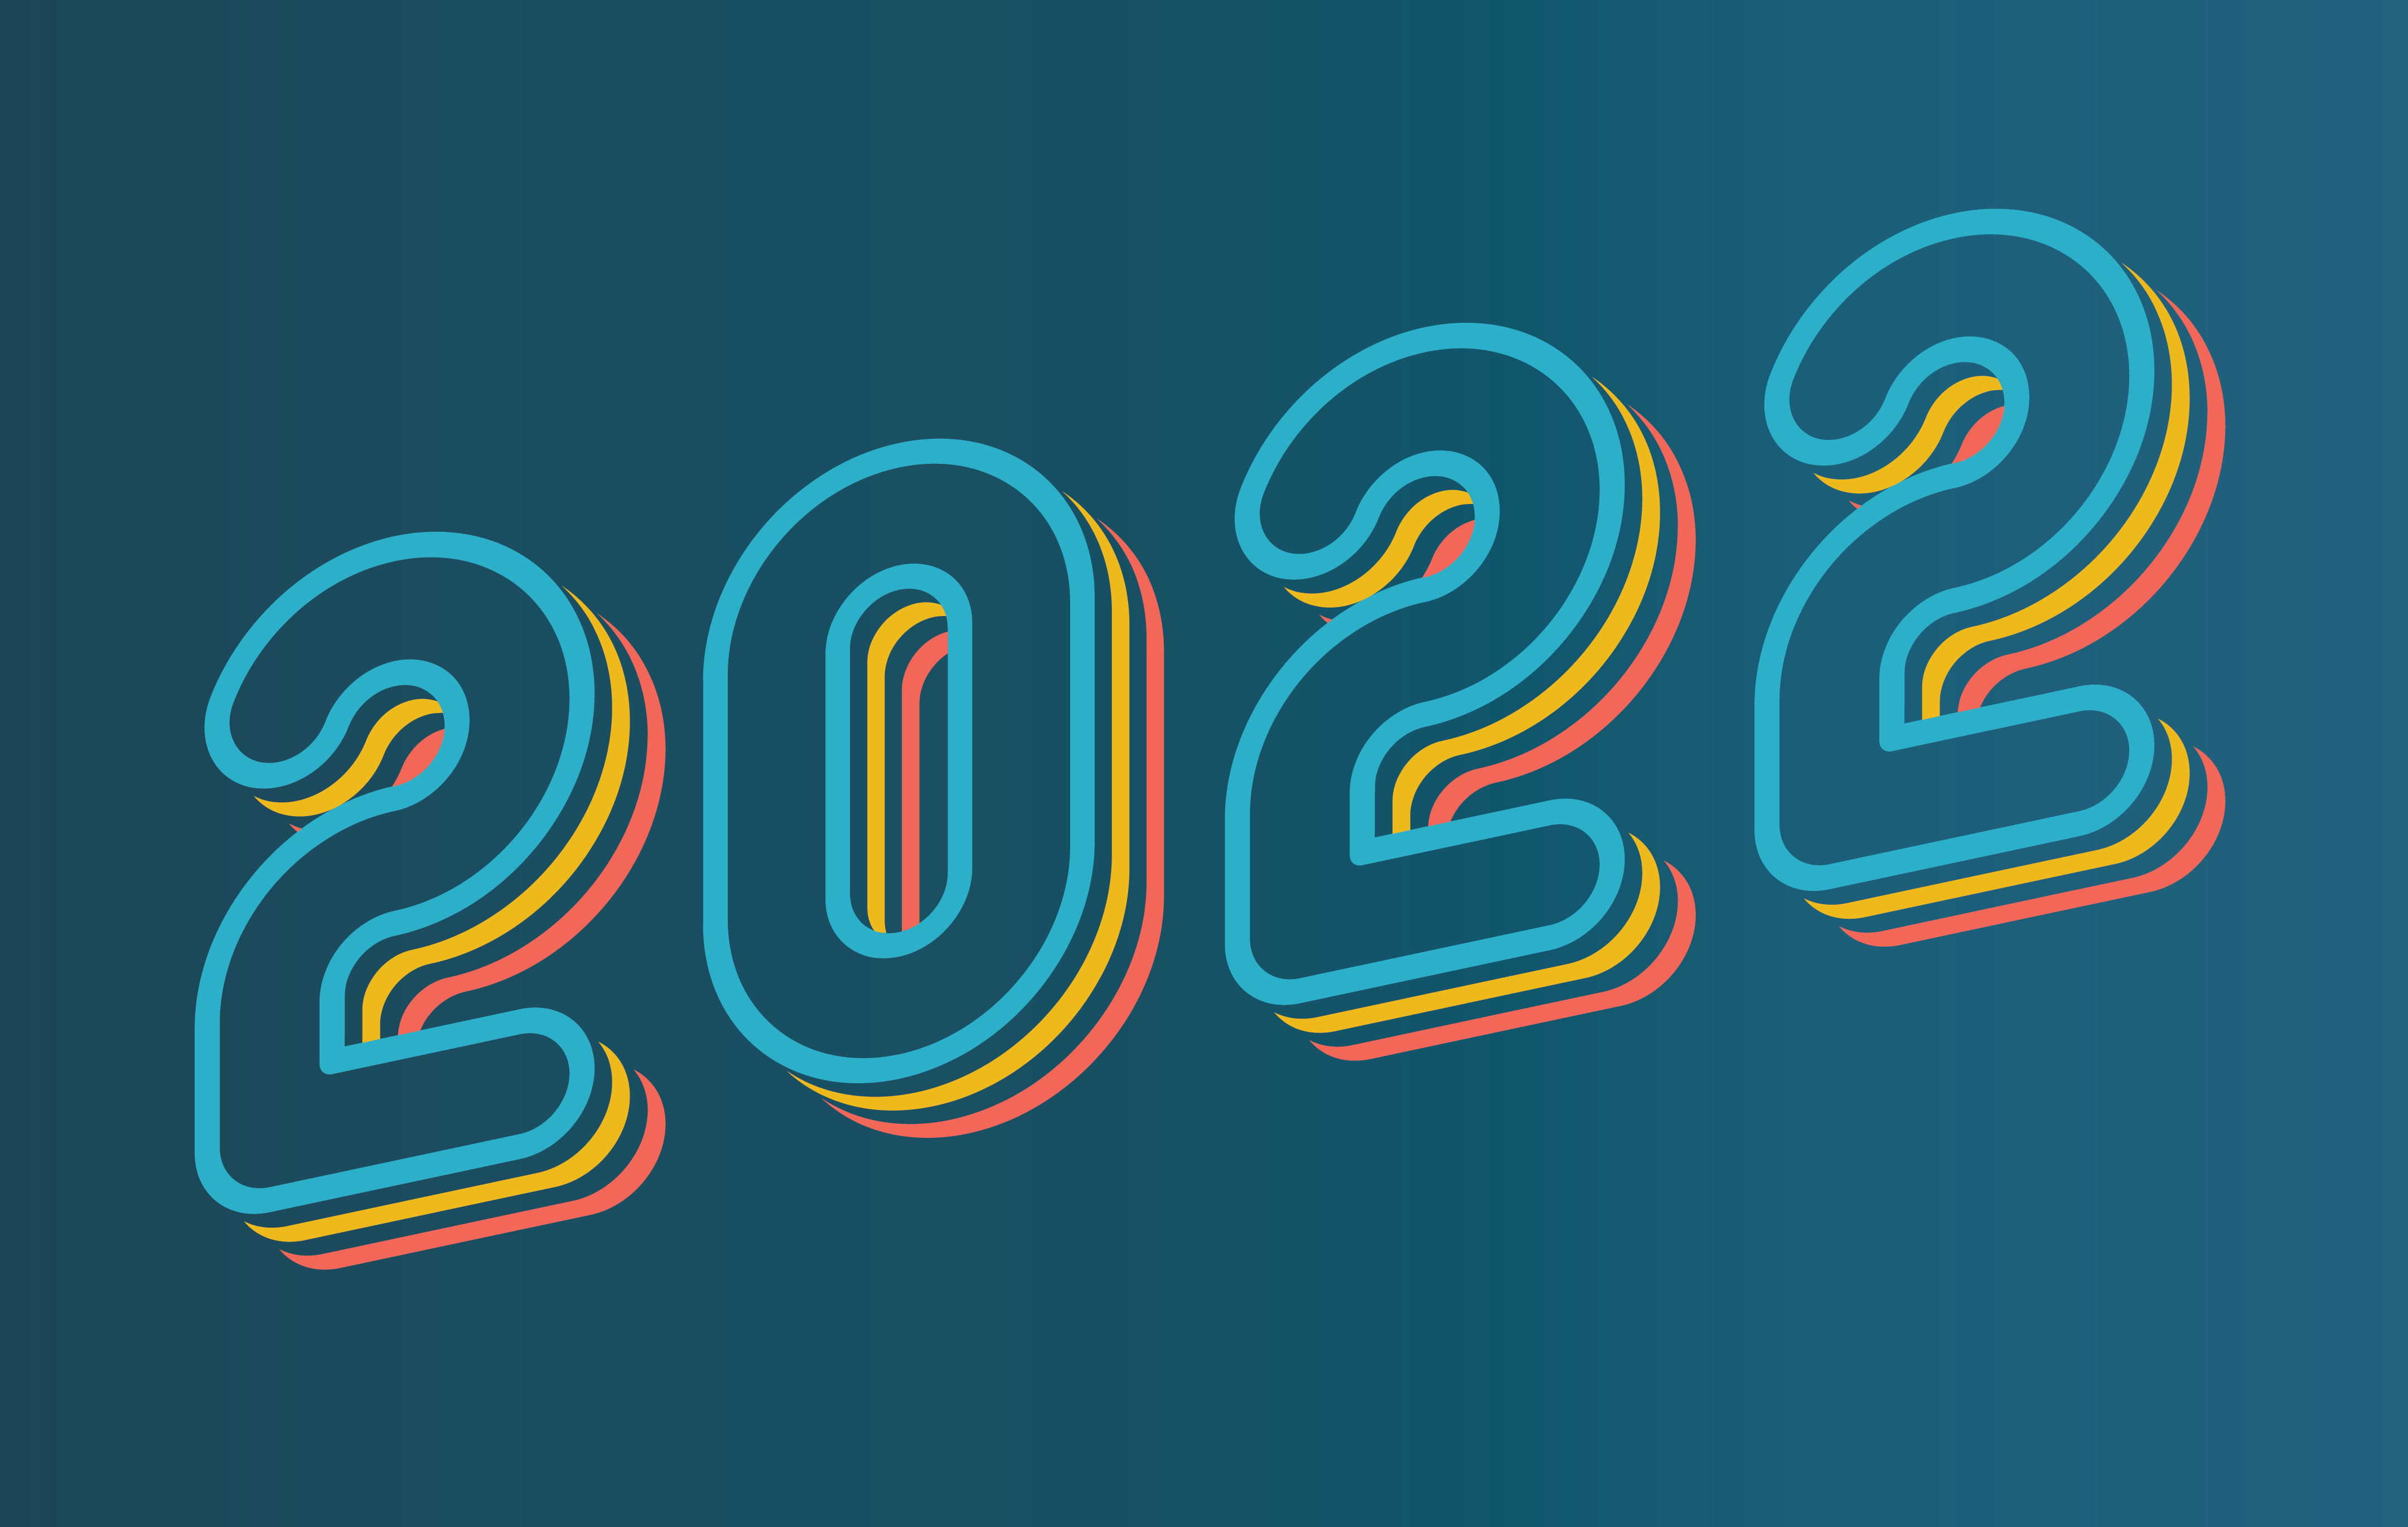 UX Research in 2022: Trends and Predictions from Our Team